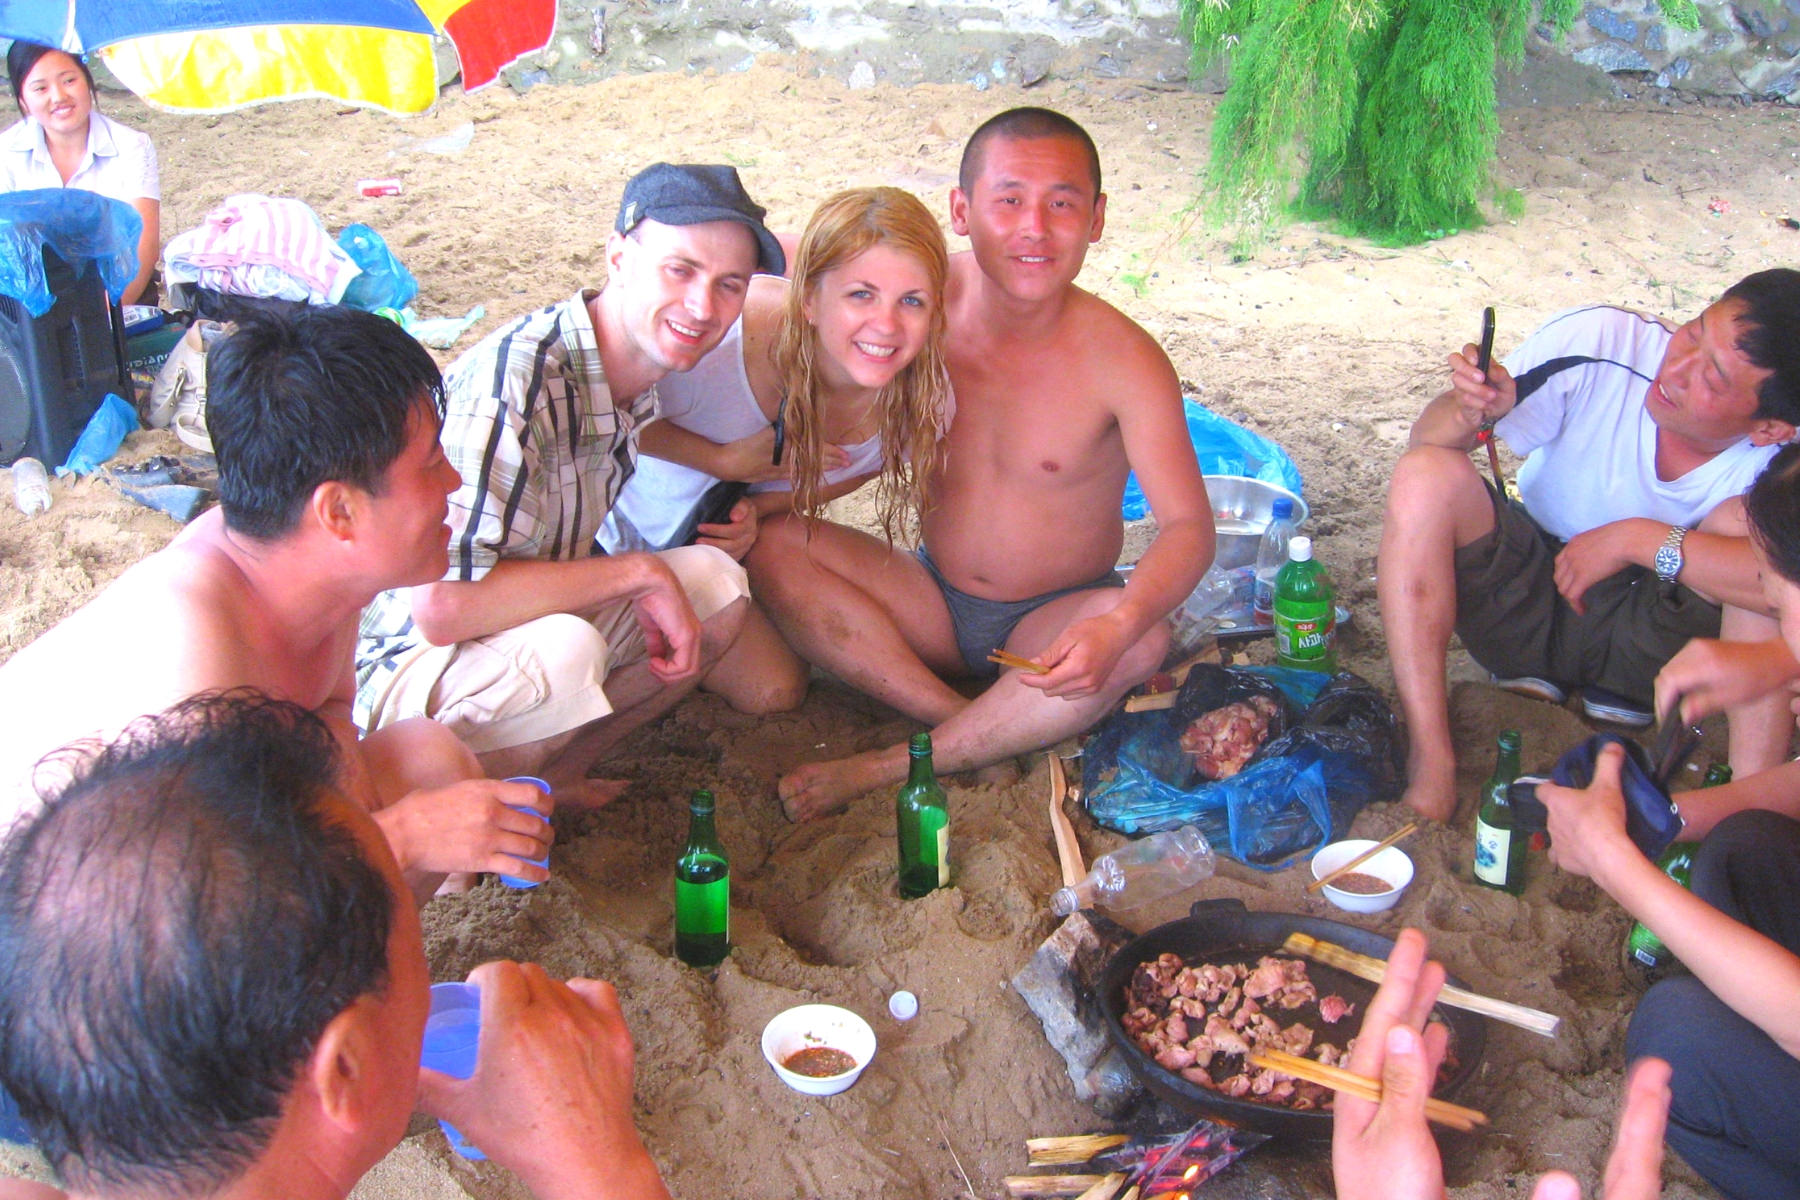 KTG travellers with North Korean tourists at the beach in Majon